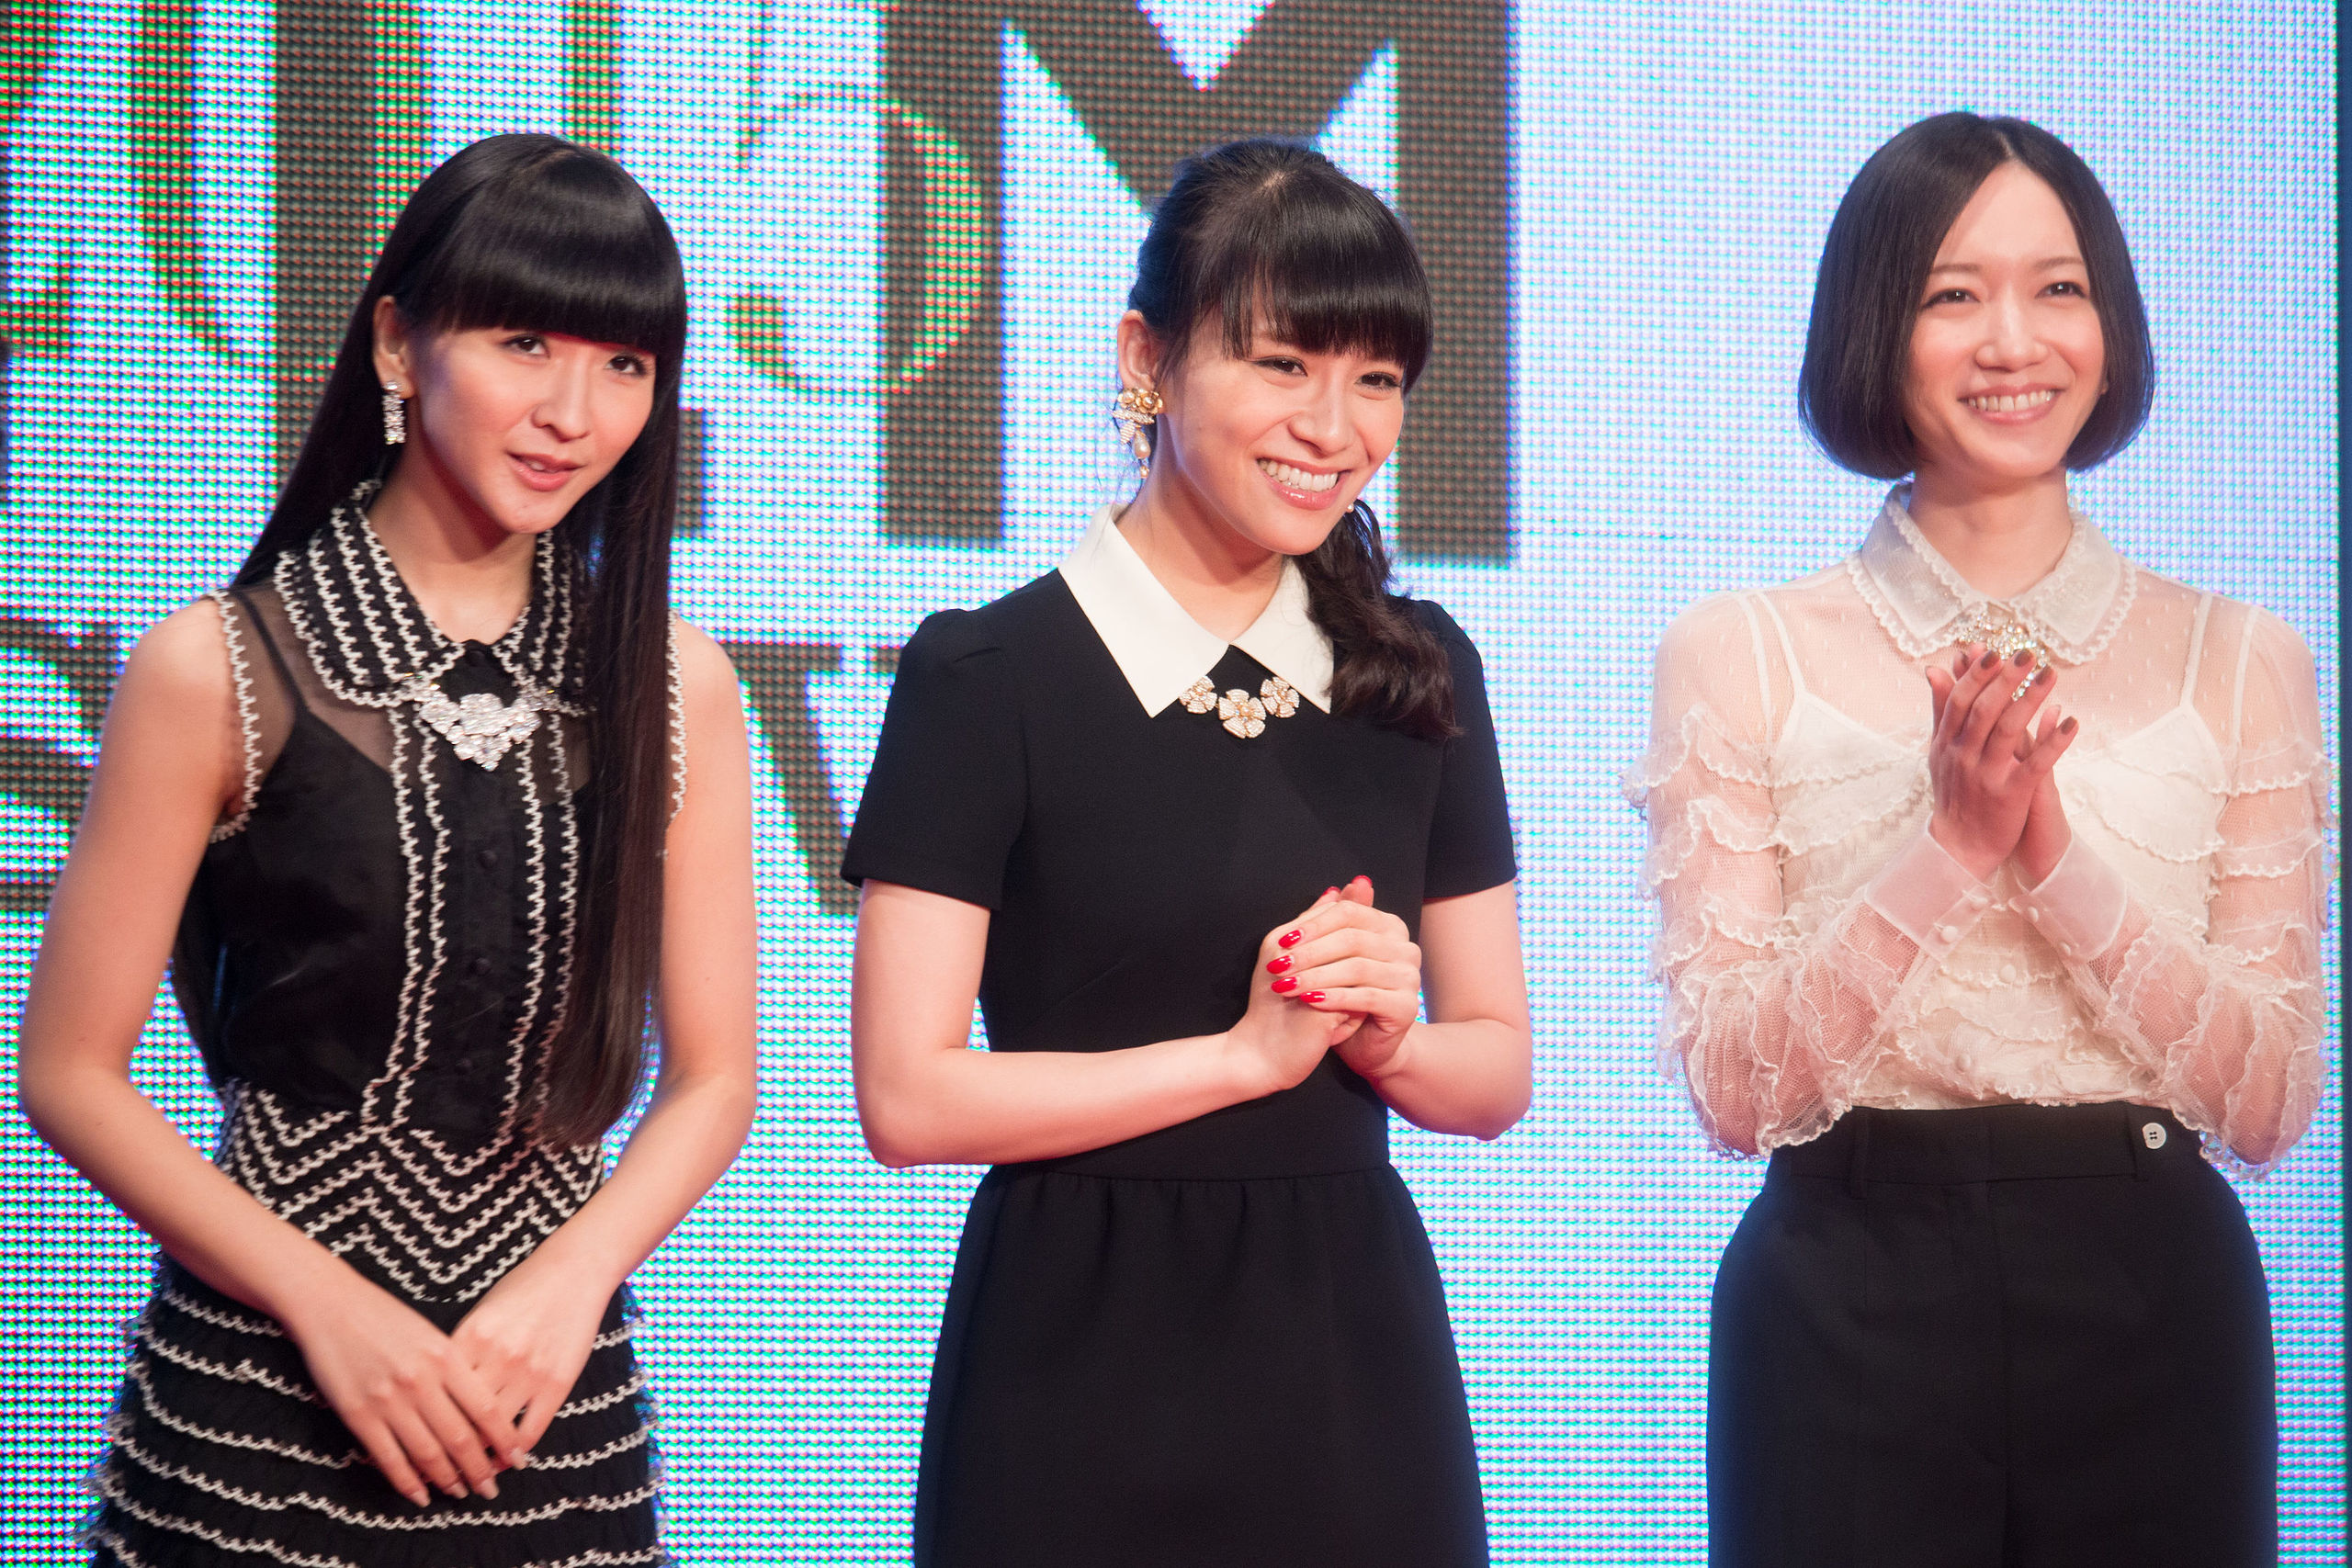 Perfume, a pop group and one of the night's performers